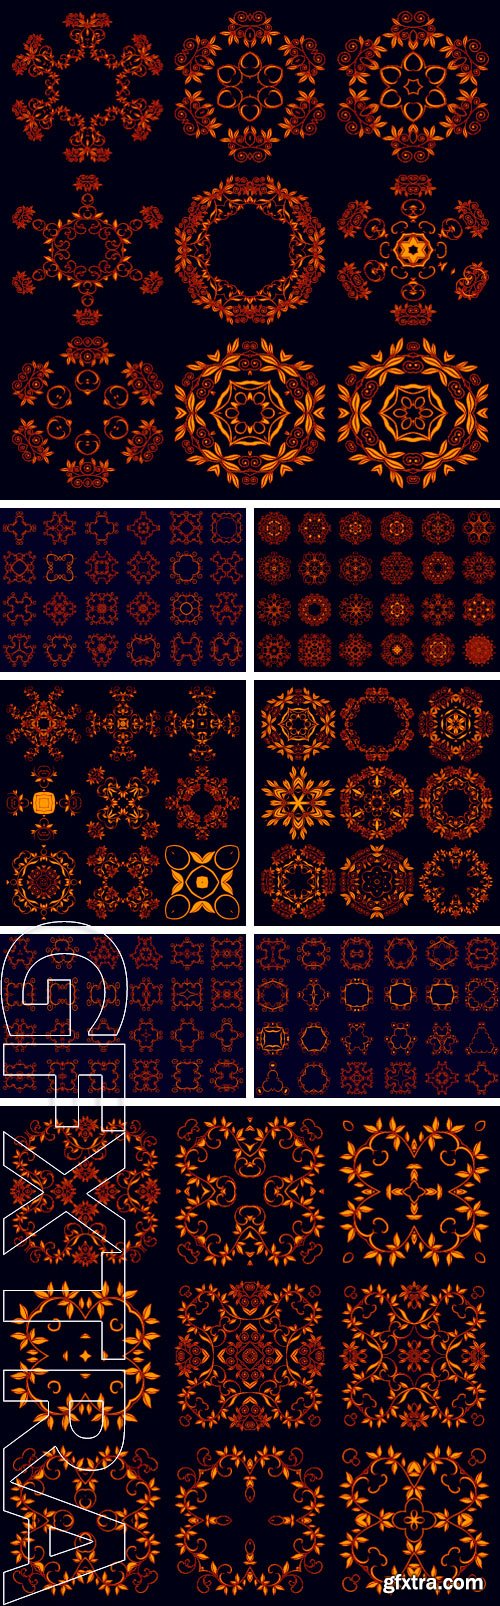 Stock Vectors - Set of round, square, patterns ornaments. Vector illustration